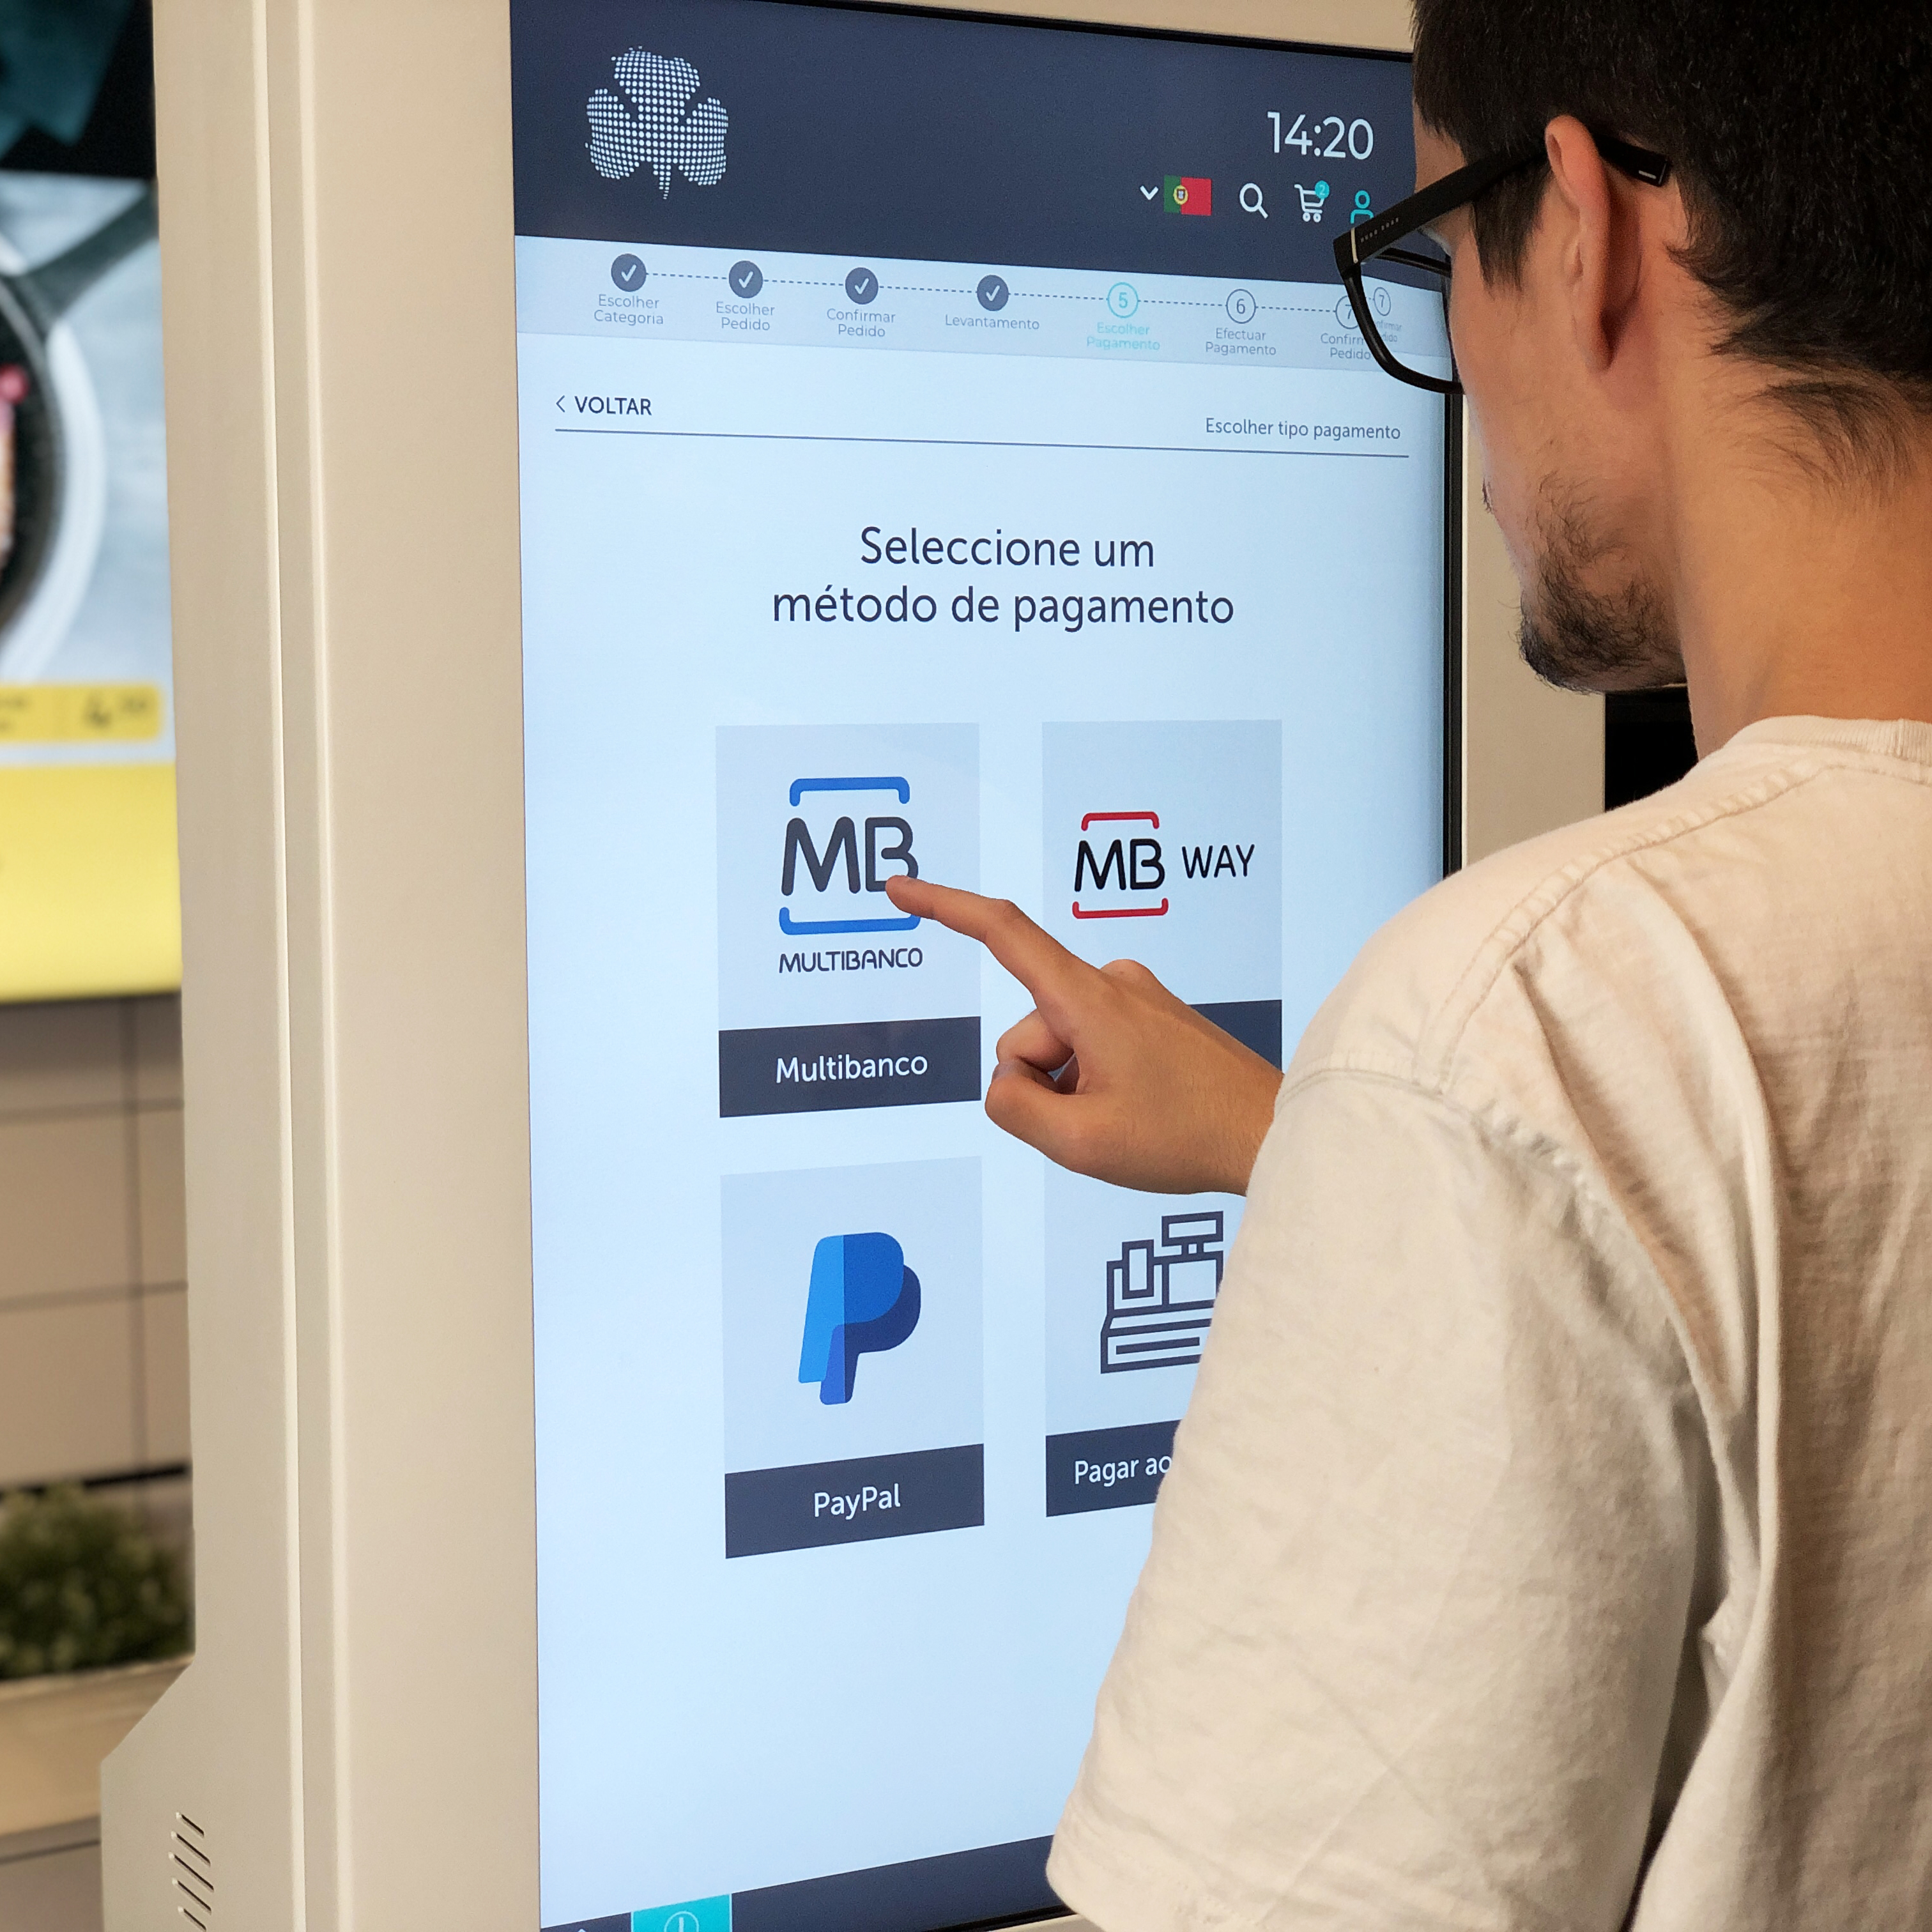 Self-service kiosks from PARTTEAM & OEMKIOSKS allow check-out in integration with Shopify